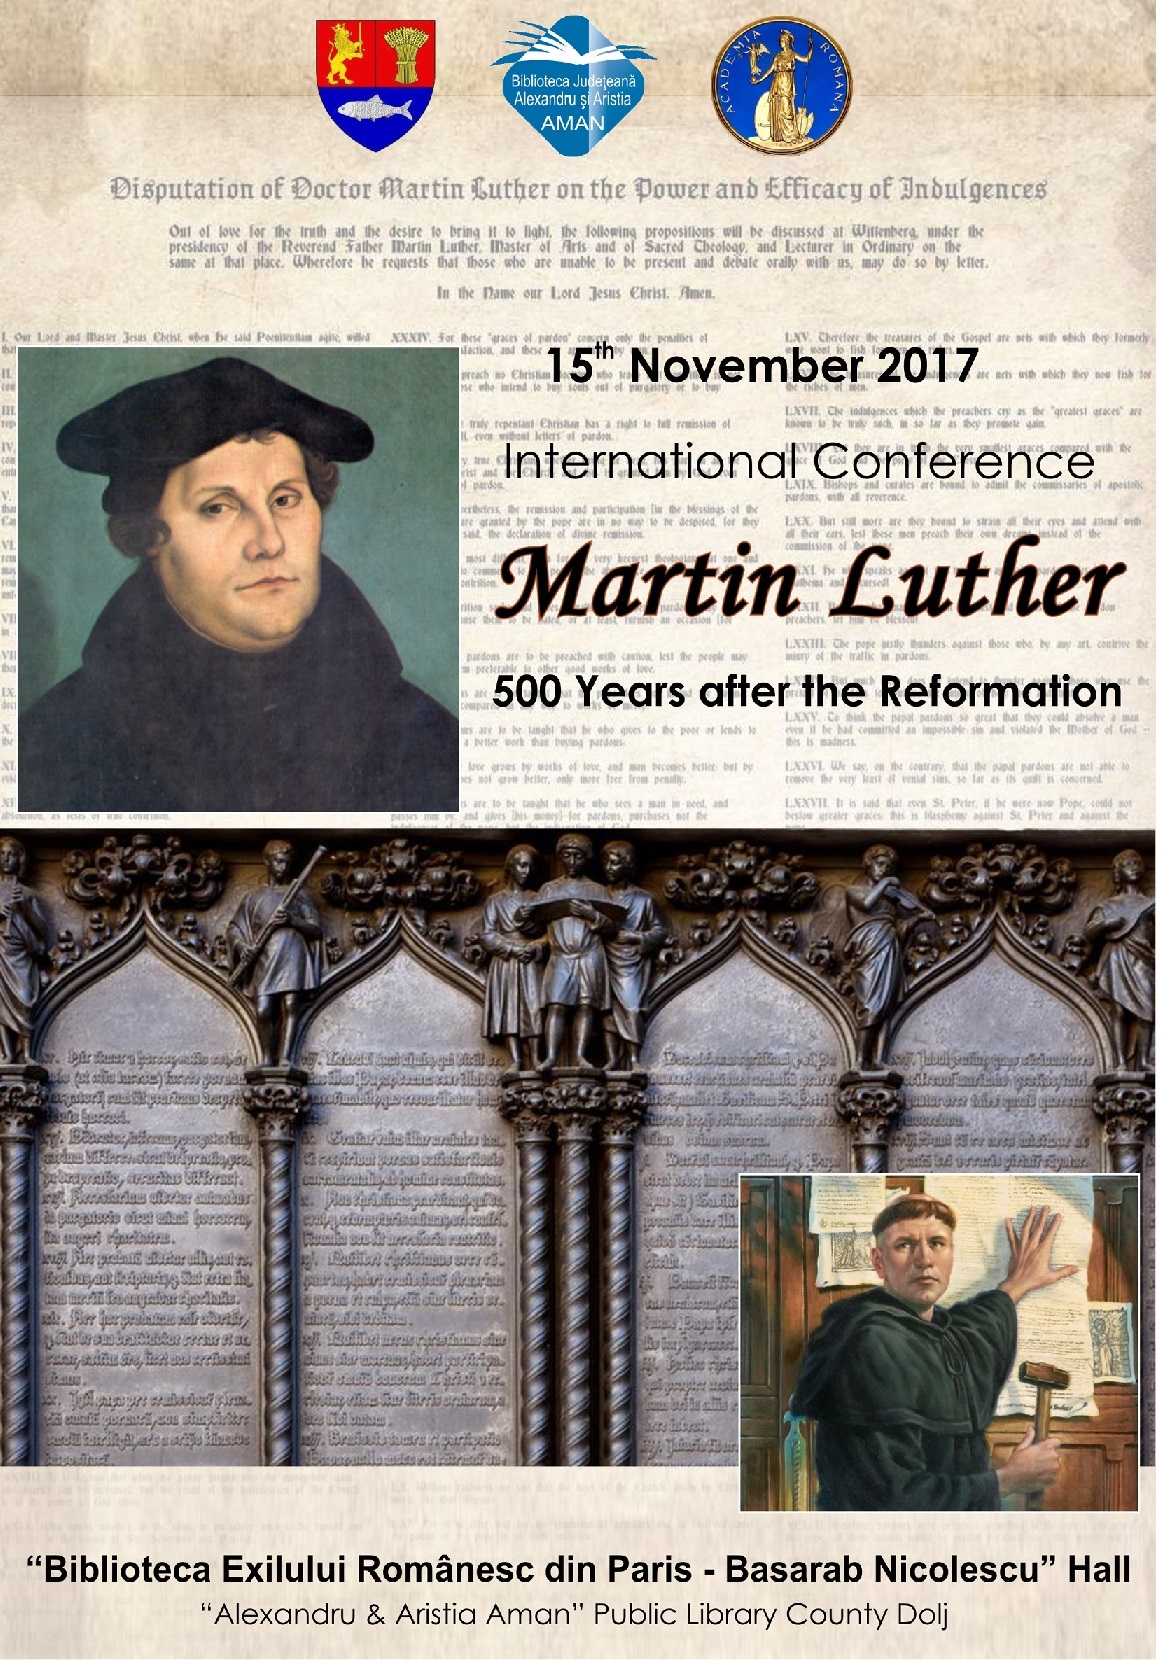 “martin Luther 500 Years After The Reformation” Euro Sud Tv